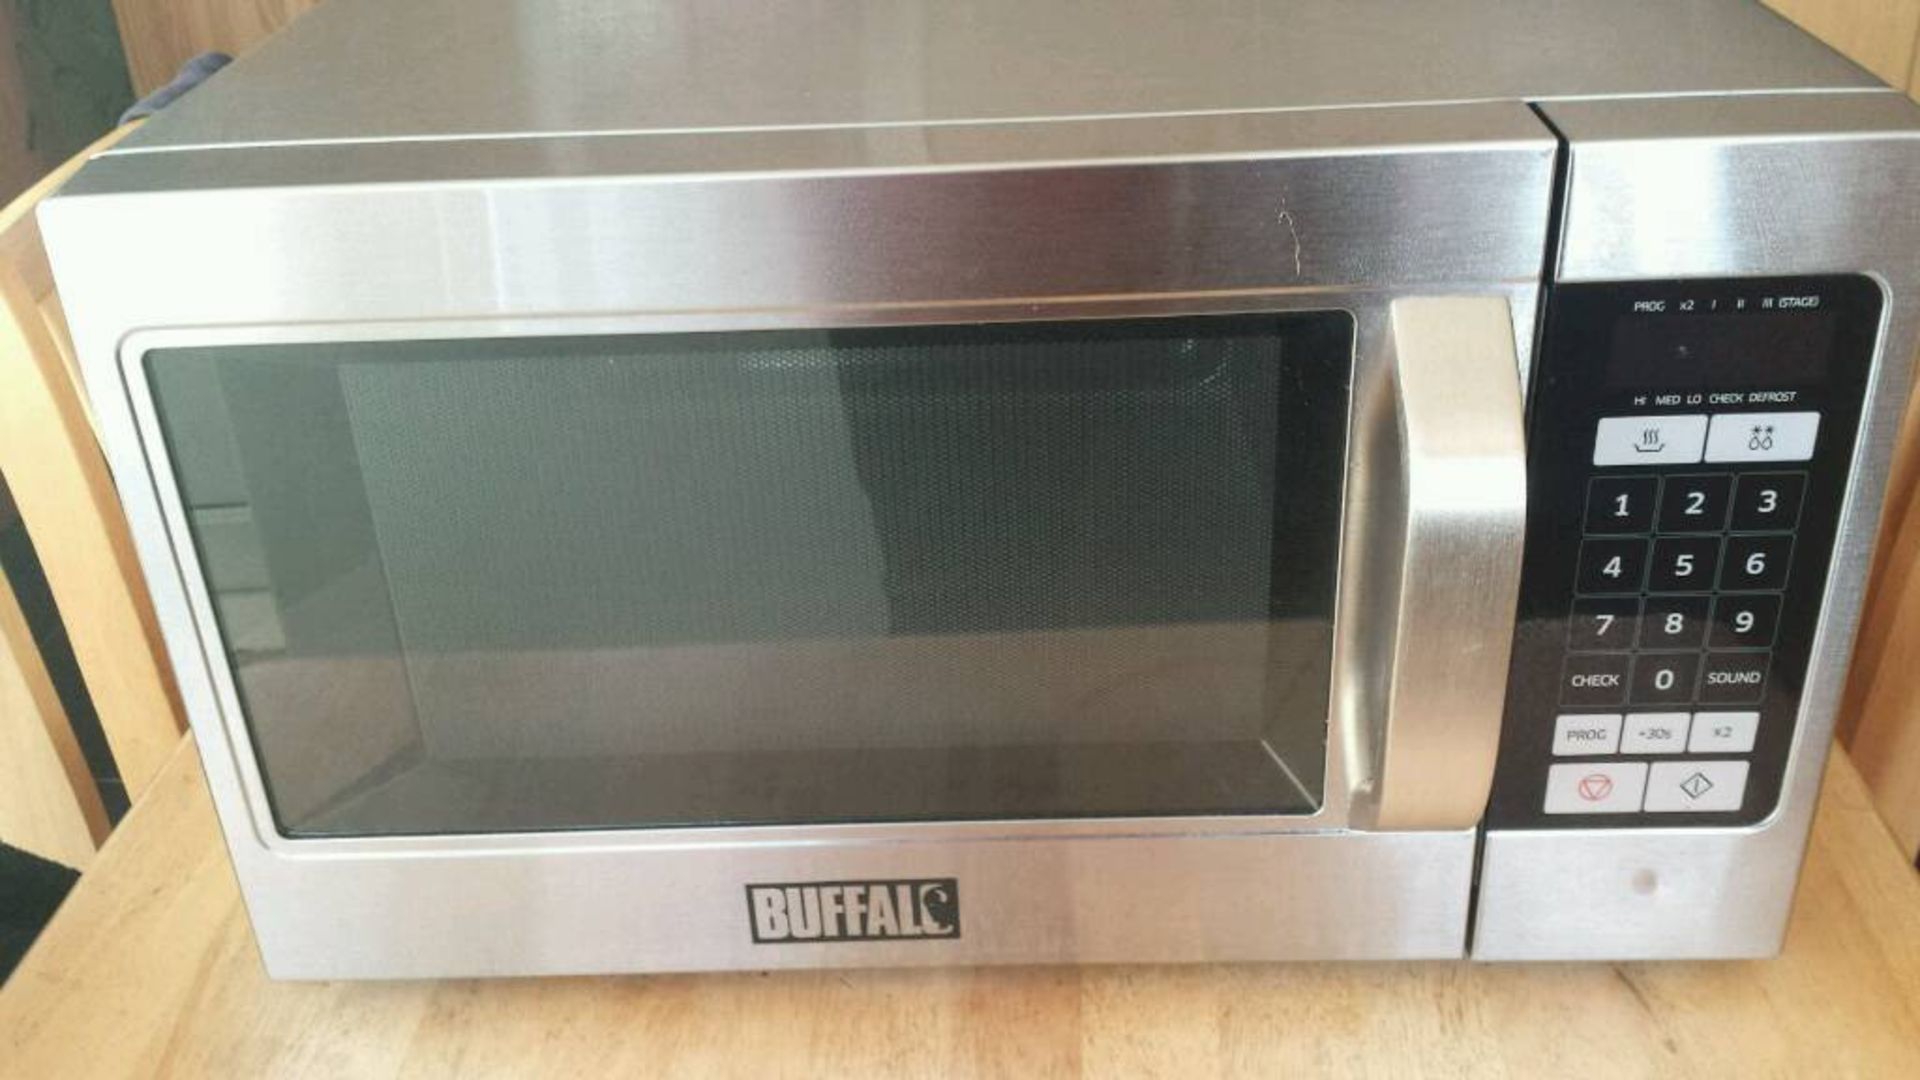 Buffalo GK642 1100w Commercial Microwave 26ltr capacity 517mm x 297mm x 438mm